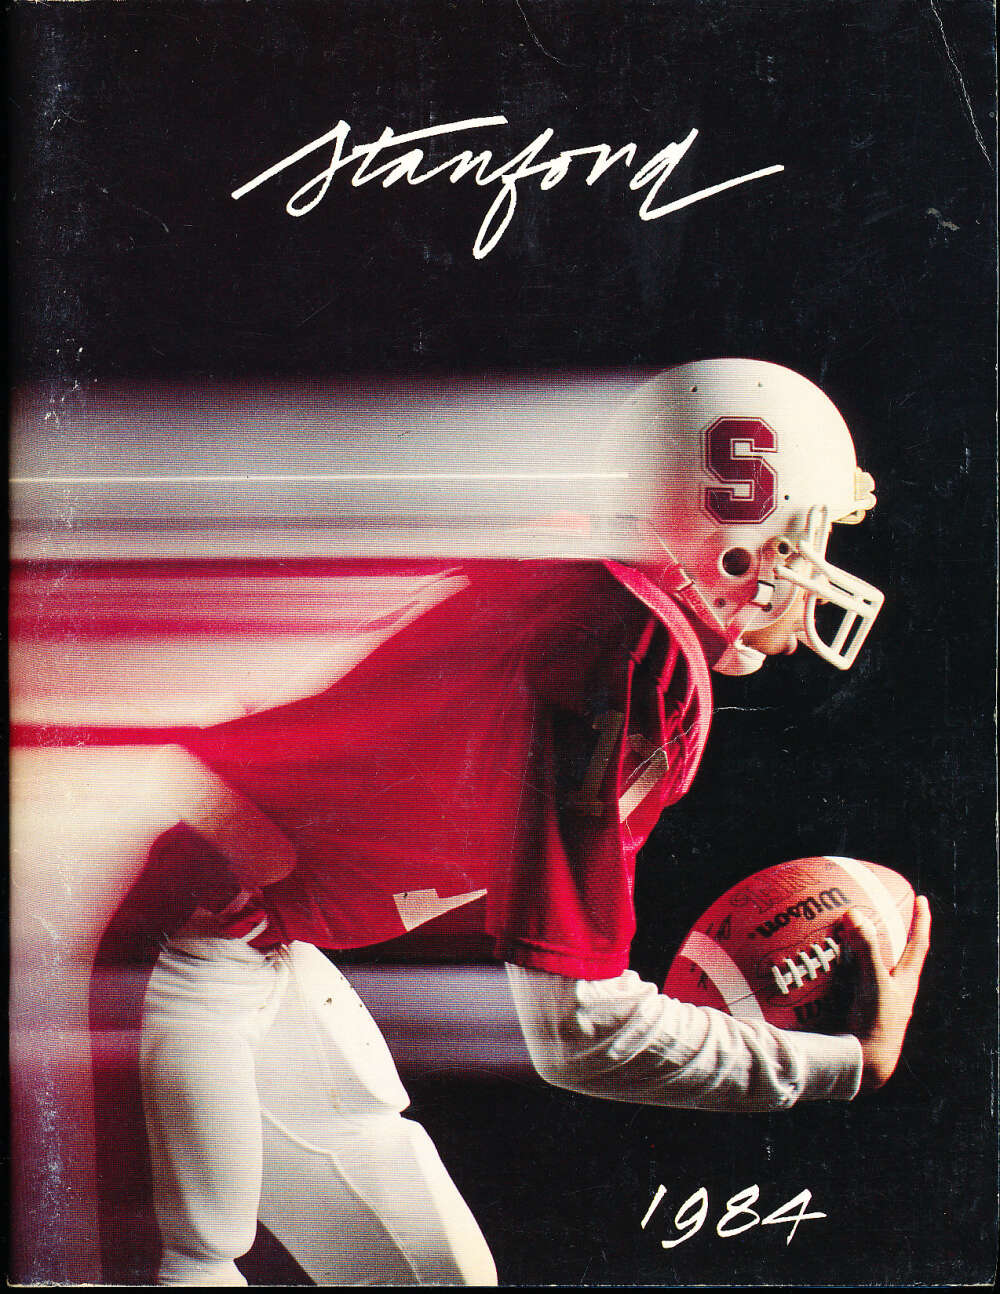 1985 Stanford Football Media Guide bxst